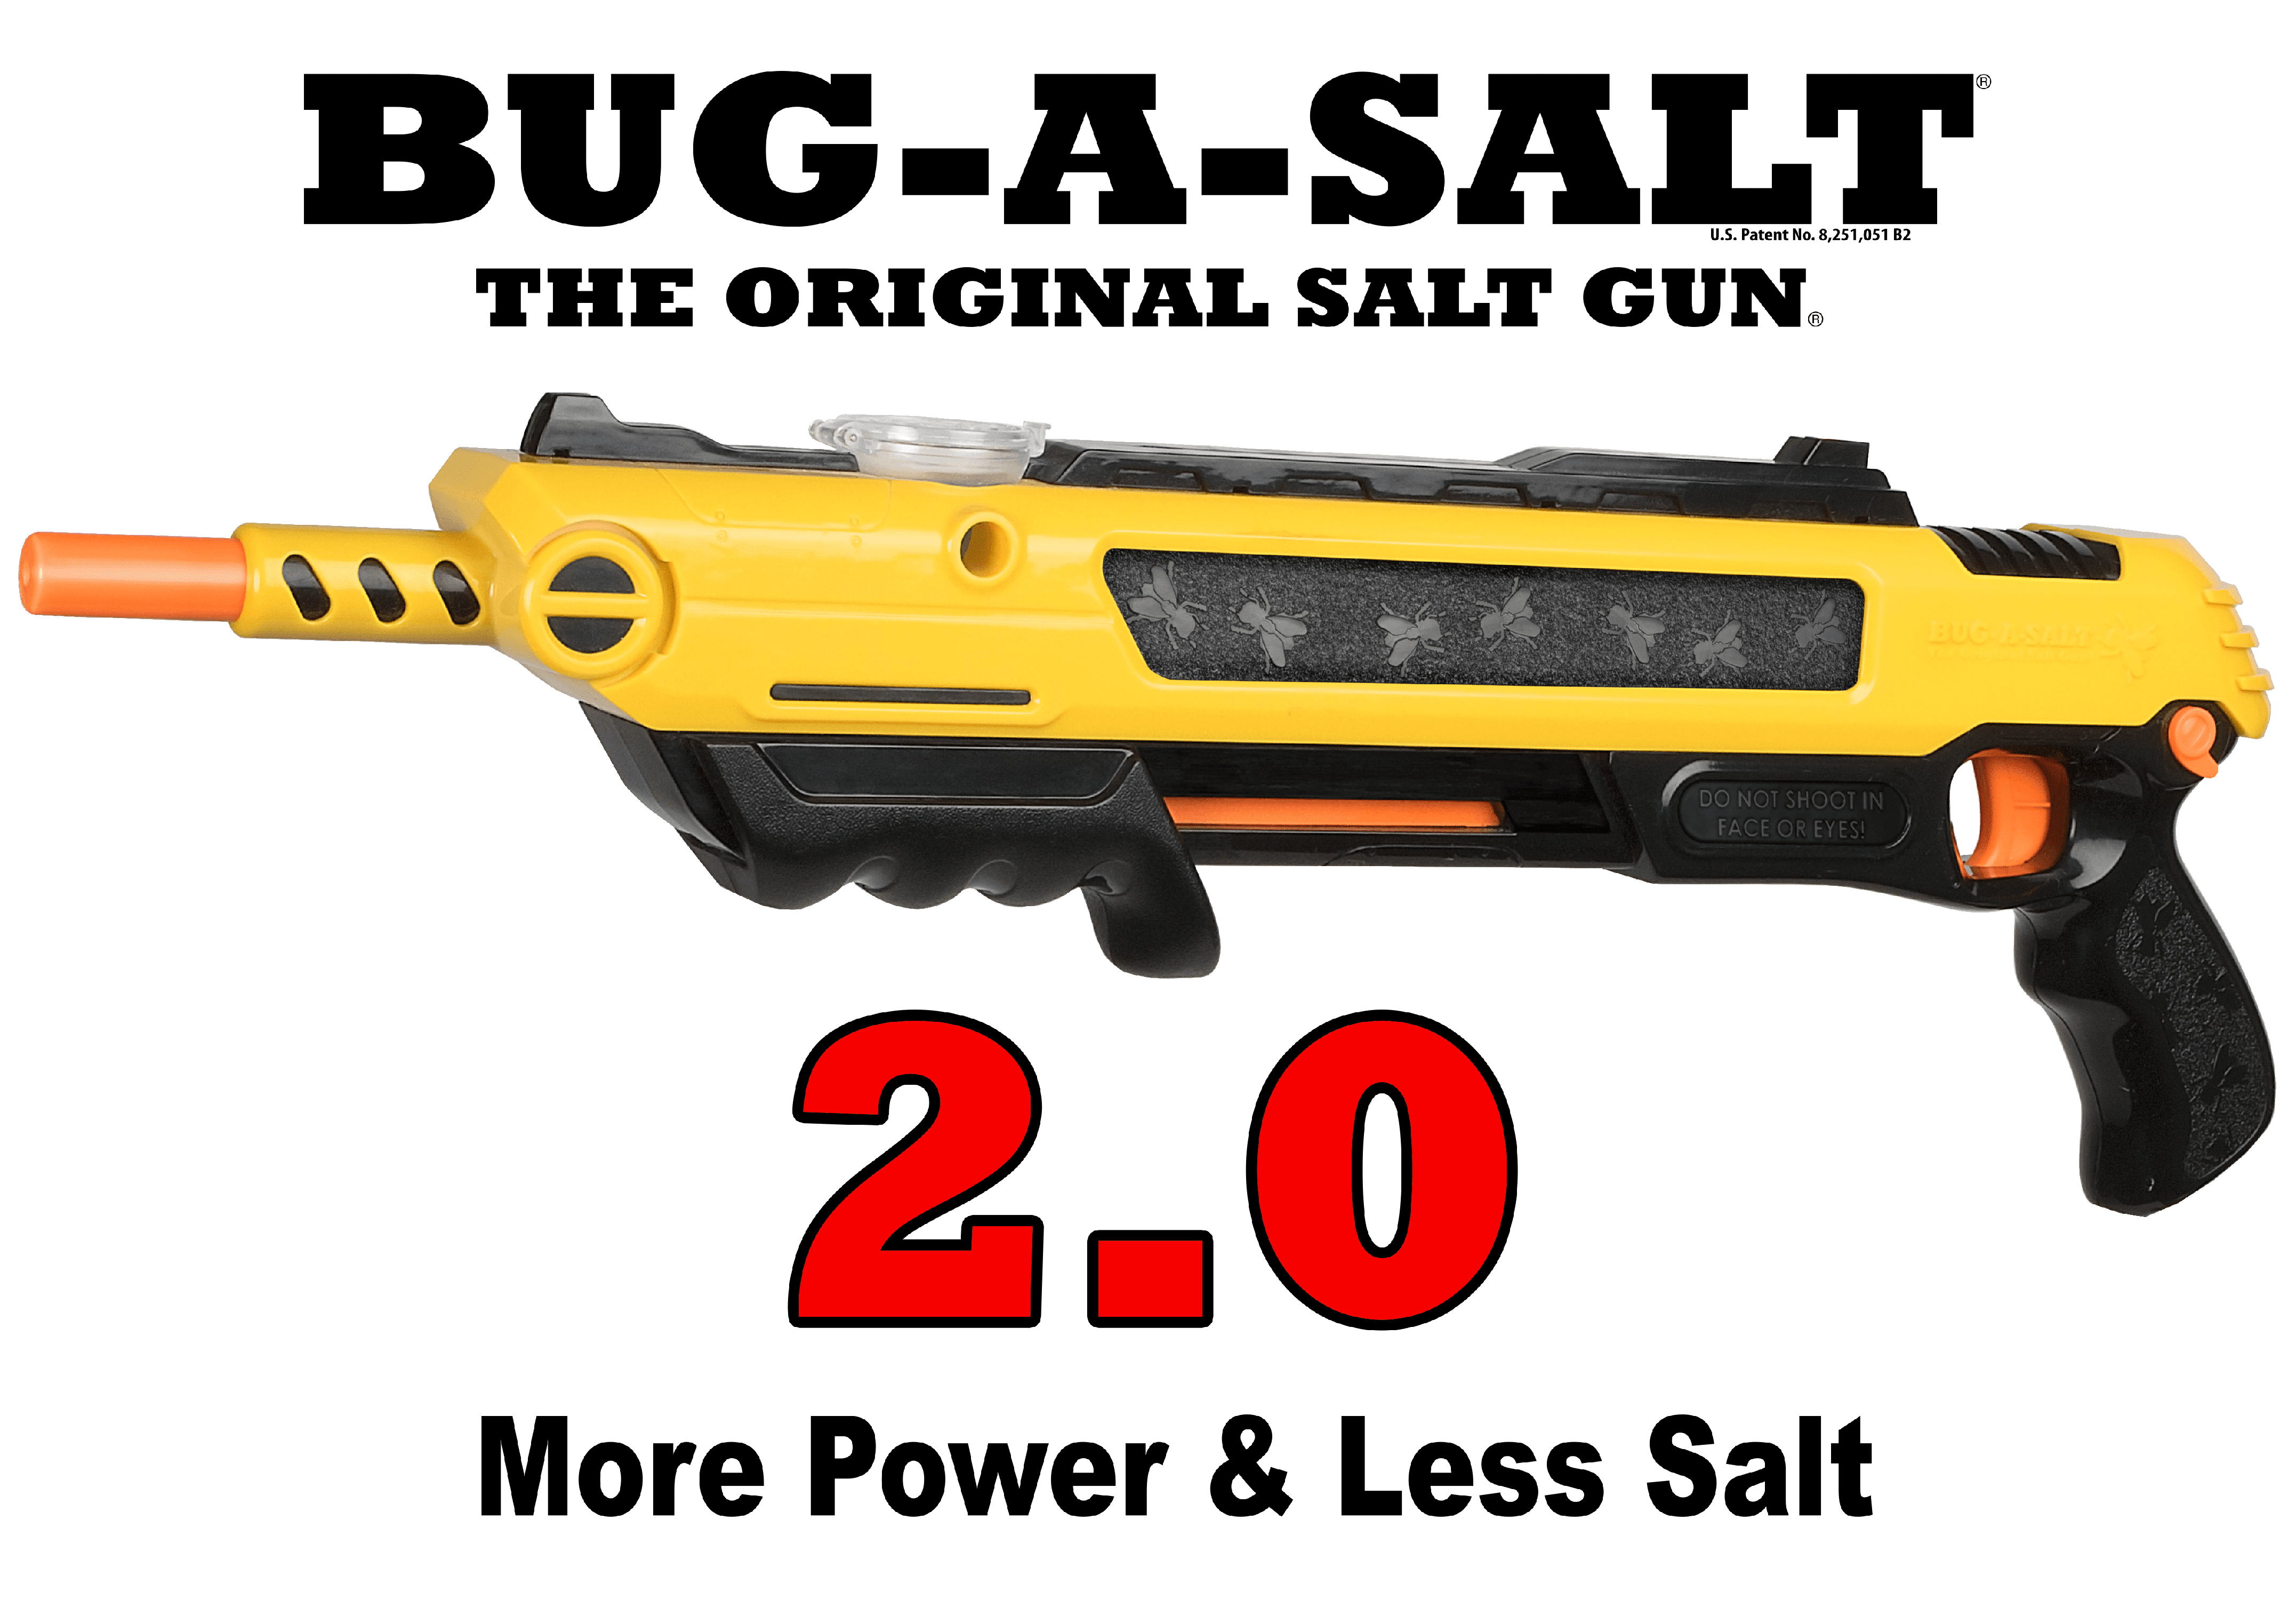 Review: I Tried the Bug-A-Salt Gun to See If It Really Can Kill Mosquitos